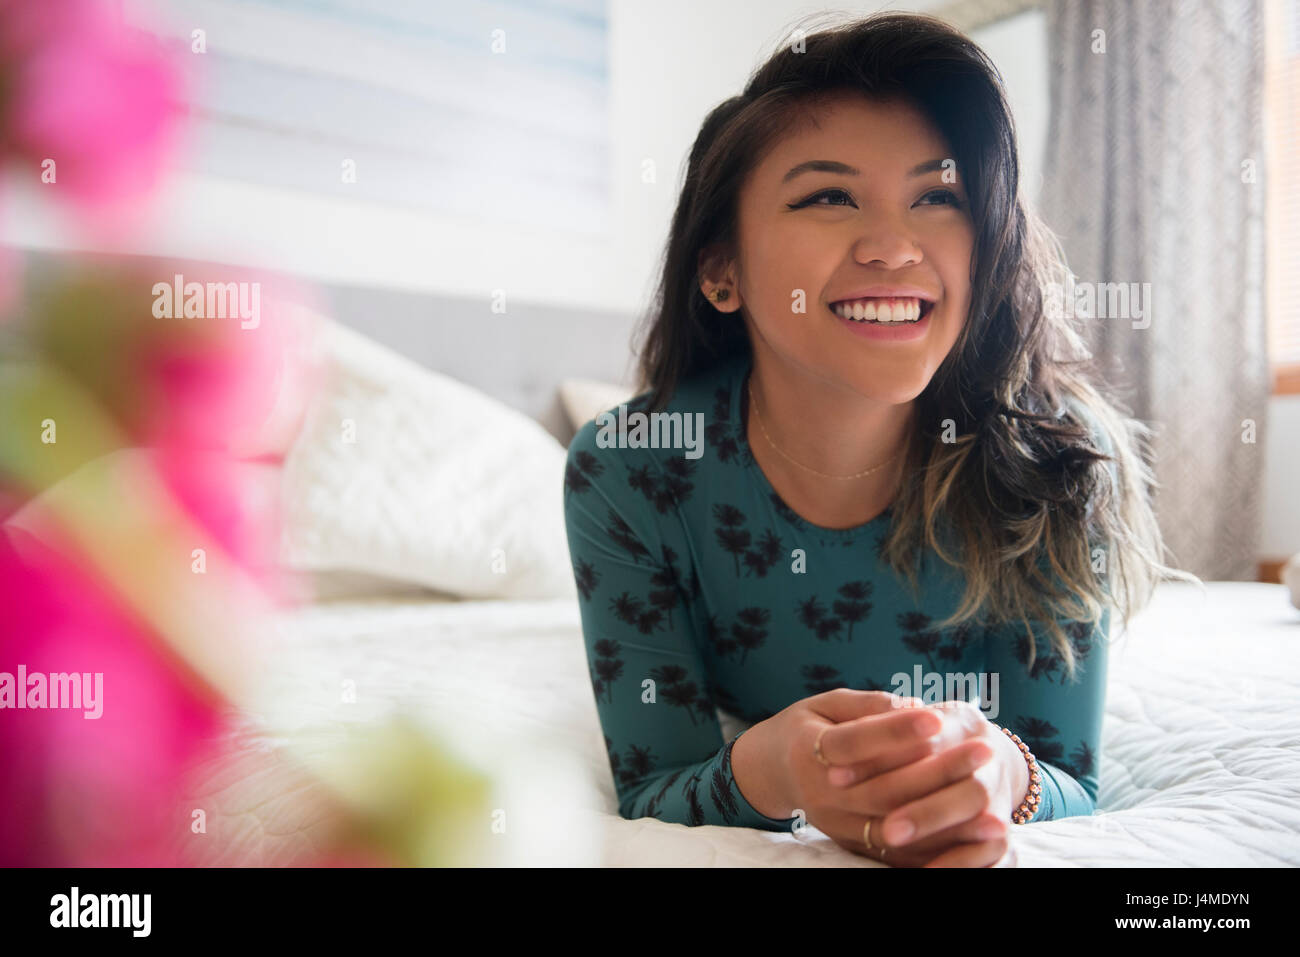 Smiling Mixed Race woman laying on bed Stock Photo